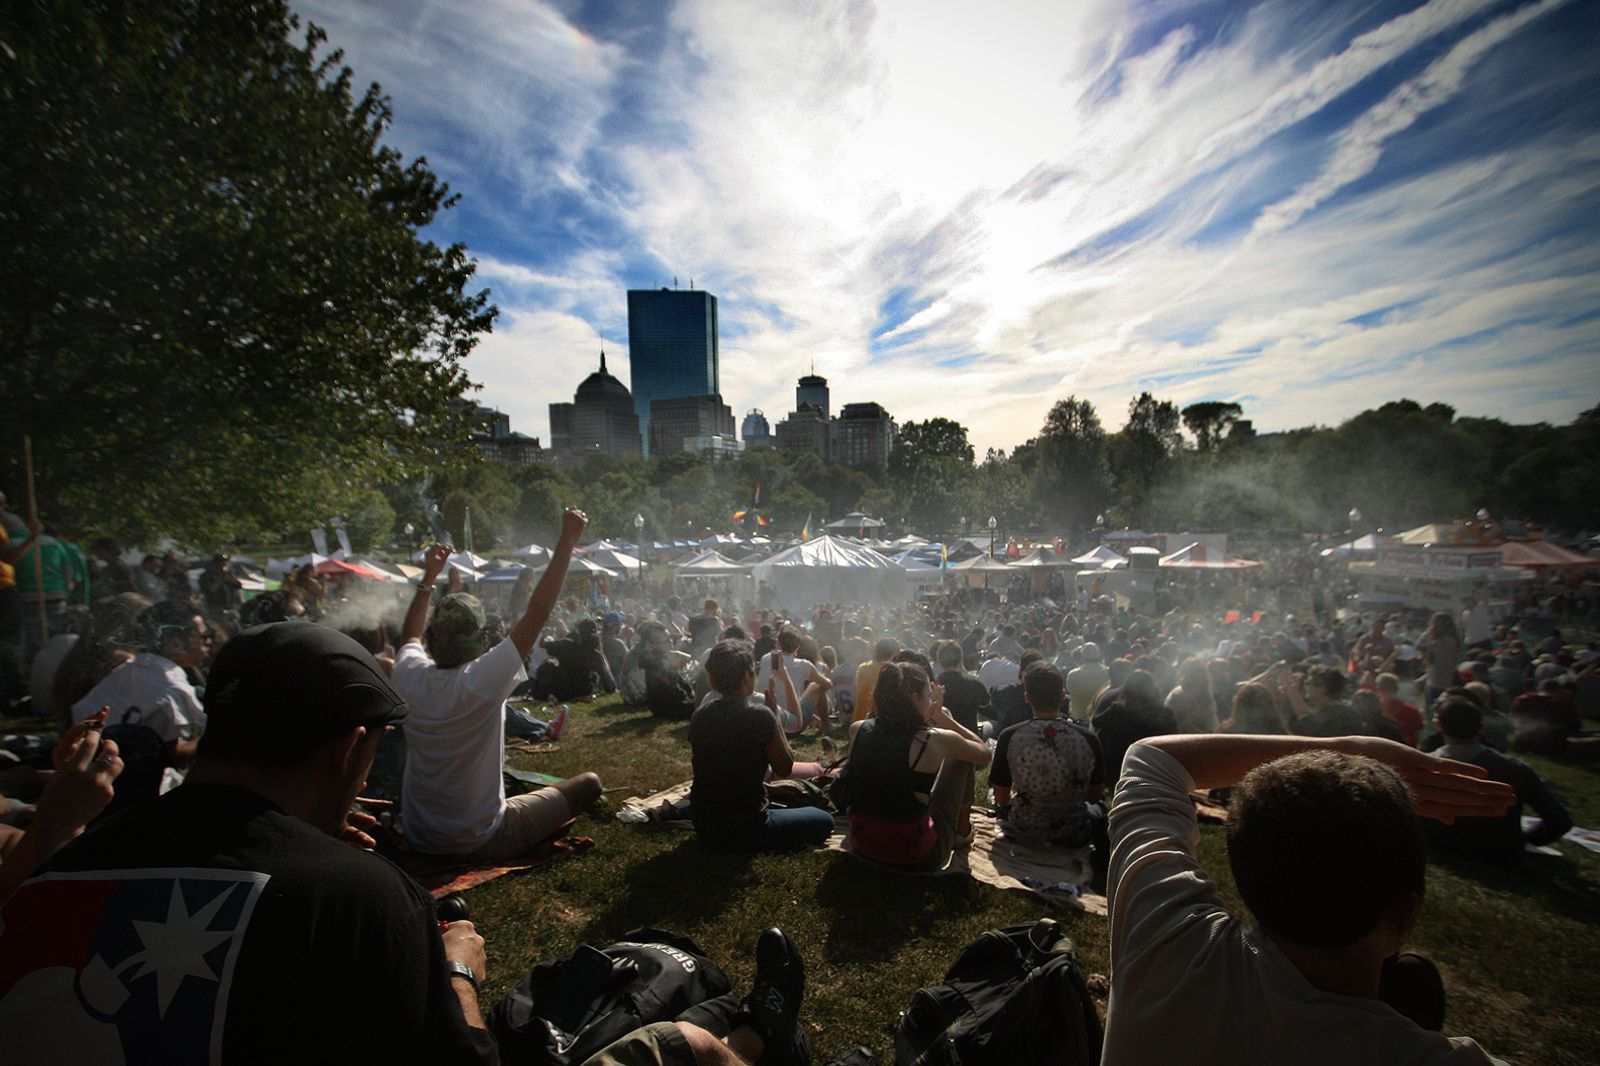 “Hempfest” freedom rally draws large crowd, little enforcement The